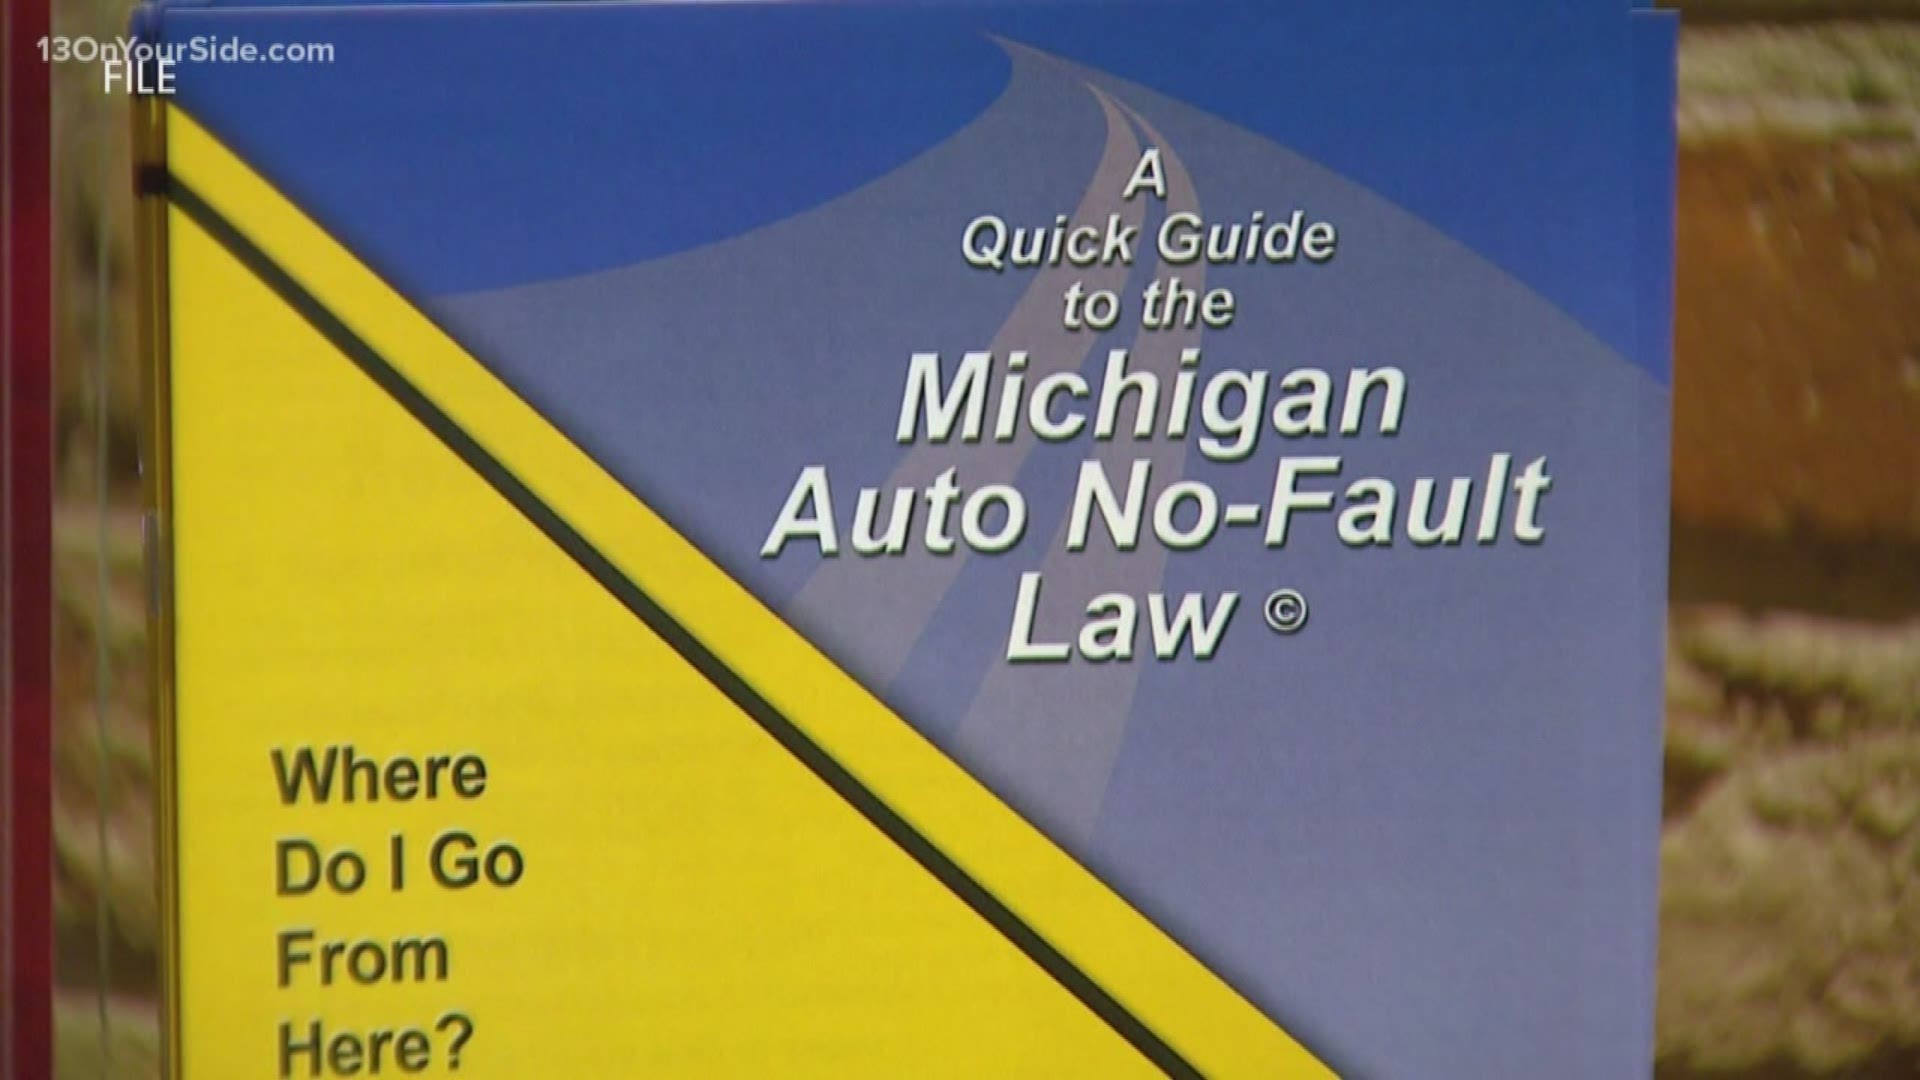 The new No-Fault Auto Insurance Law may have you scratching your head. Brandon Hewitt from Michigan Auto Law joined us with advice on what to ask your agent.